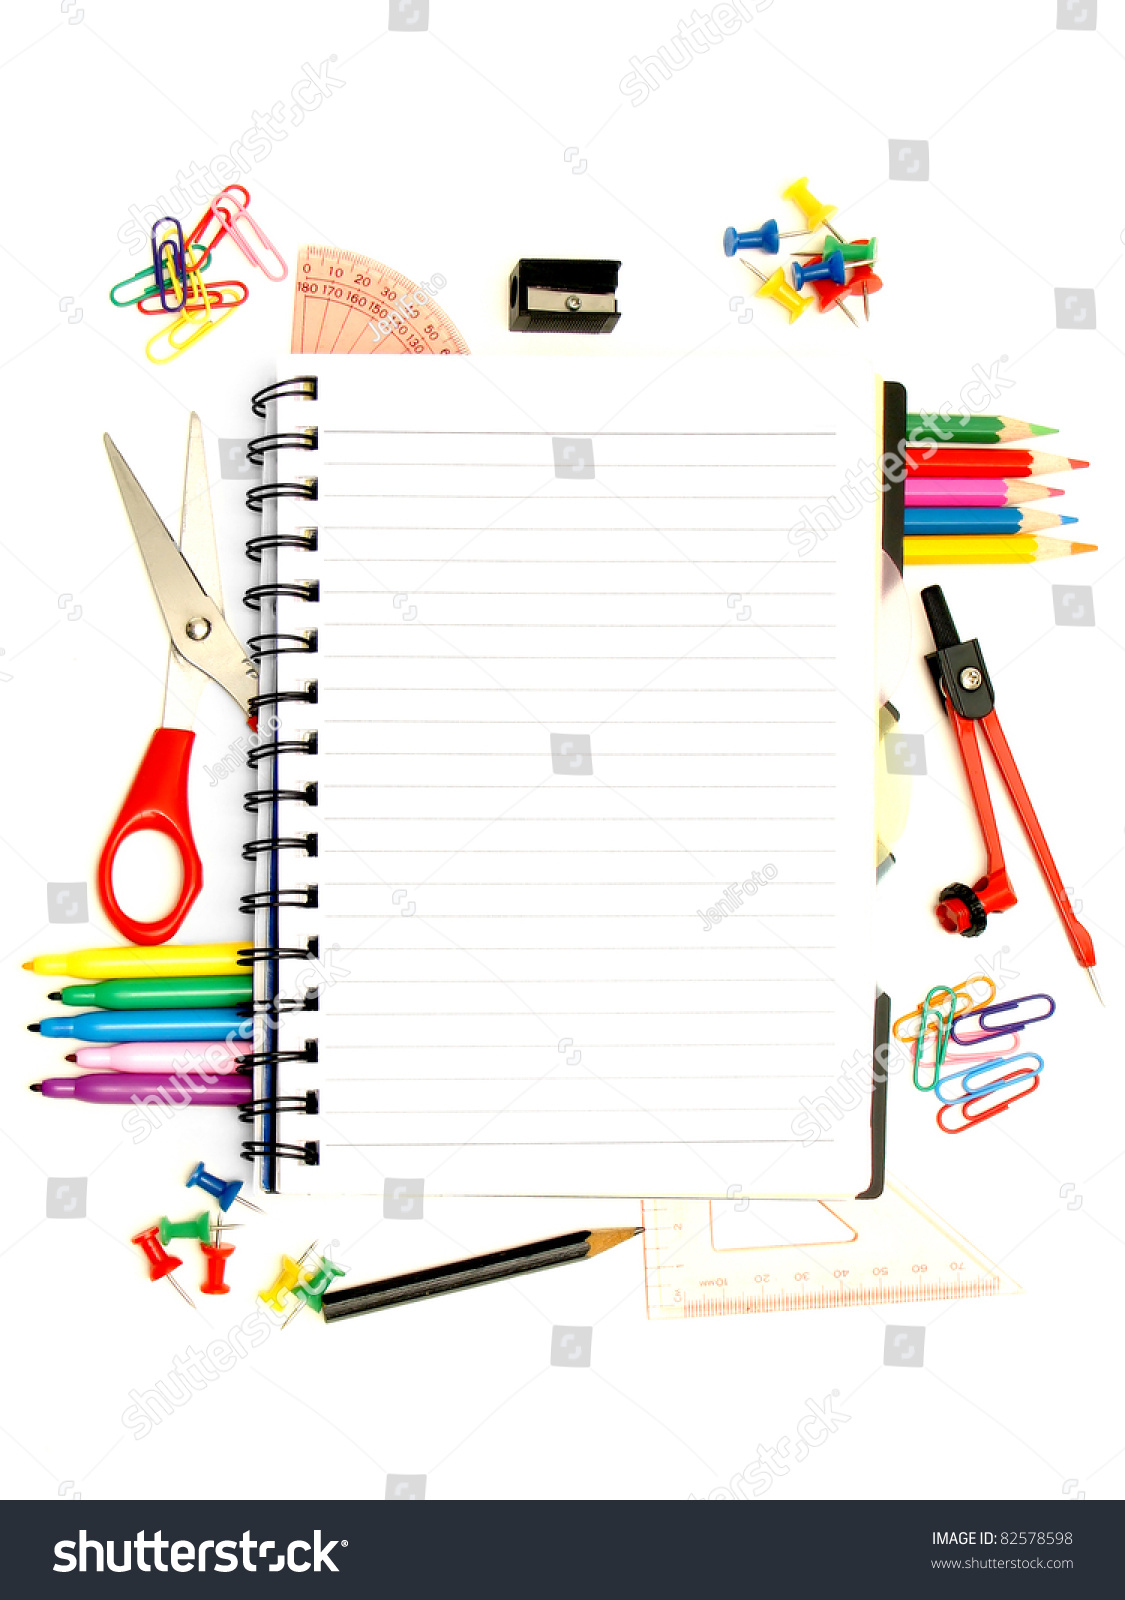 free clipart images office supplies - photo #47